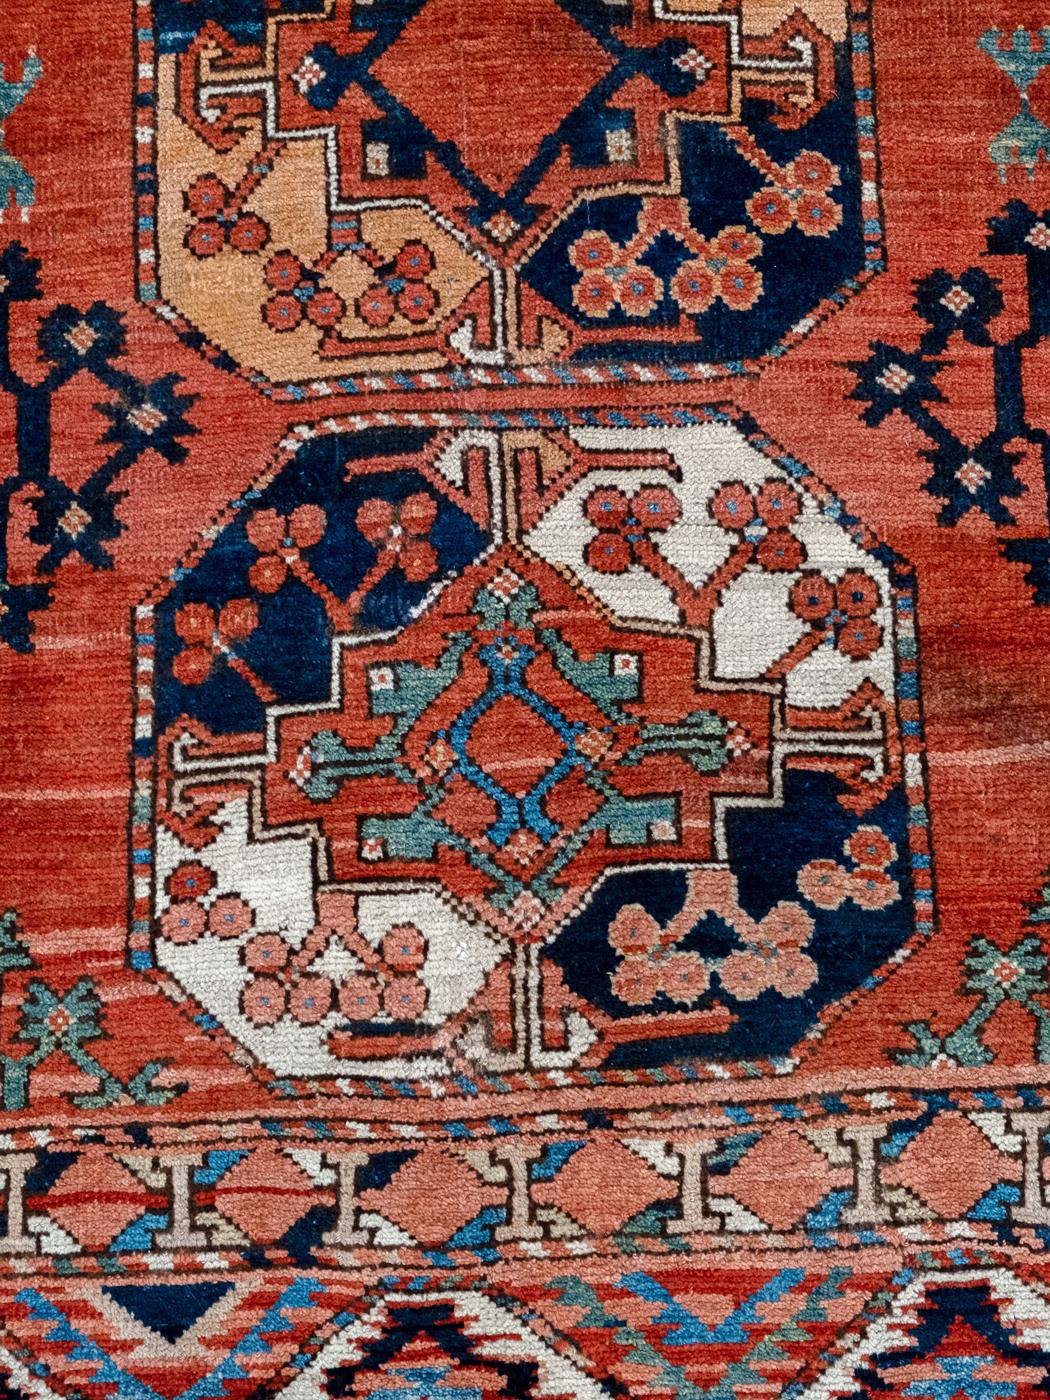 Late 19th Century Hand-Knotted Bright and Brilliant Antique Persian Ersari Carpet, Wool, 7' x 9' For Sale